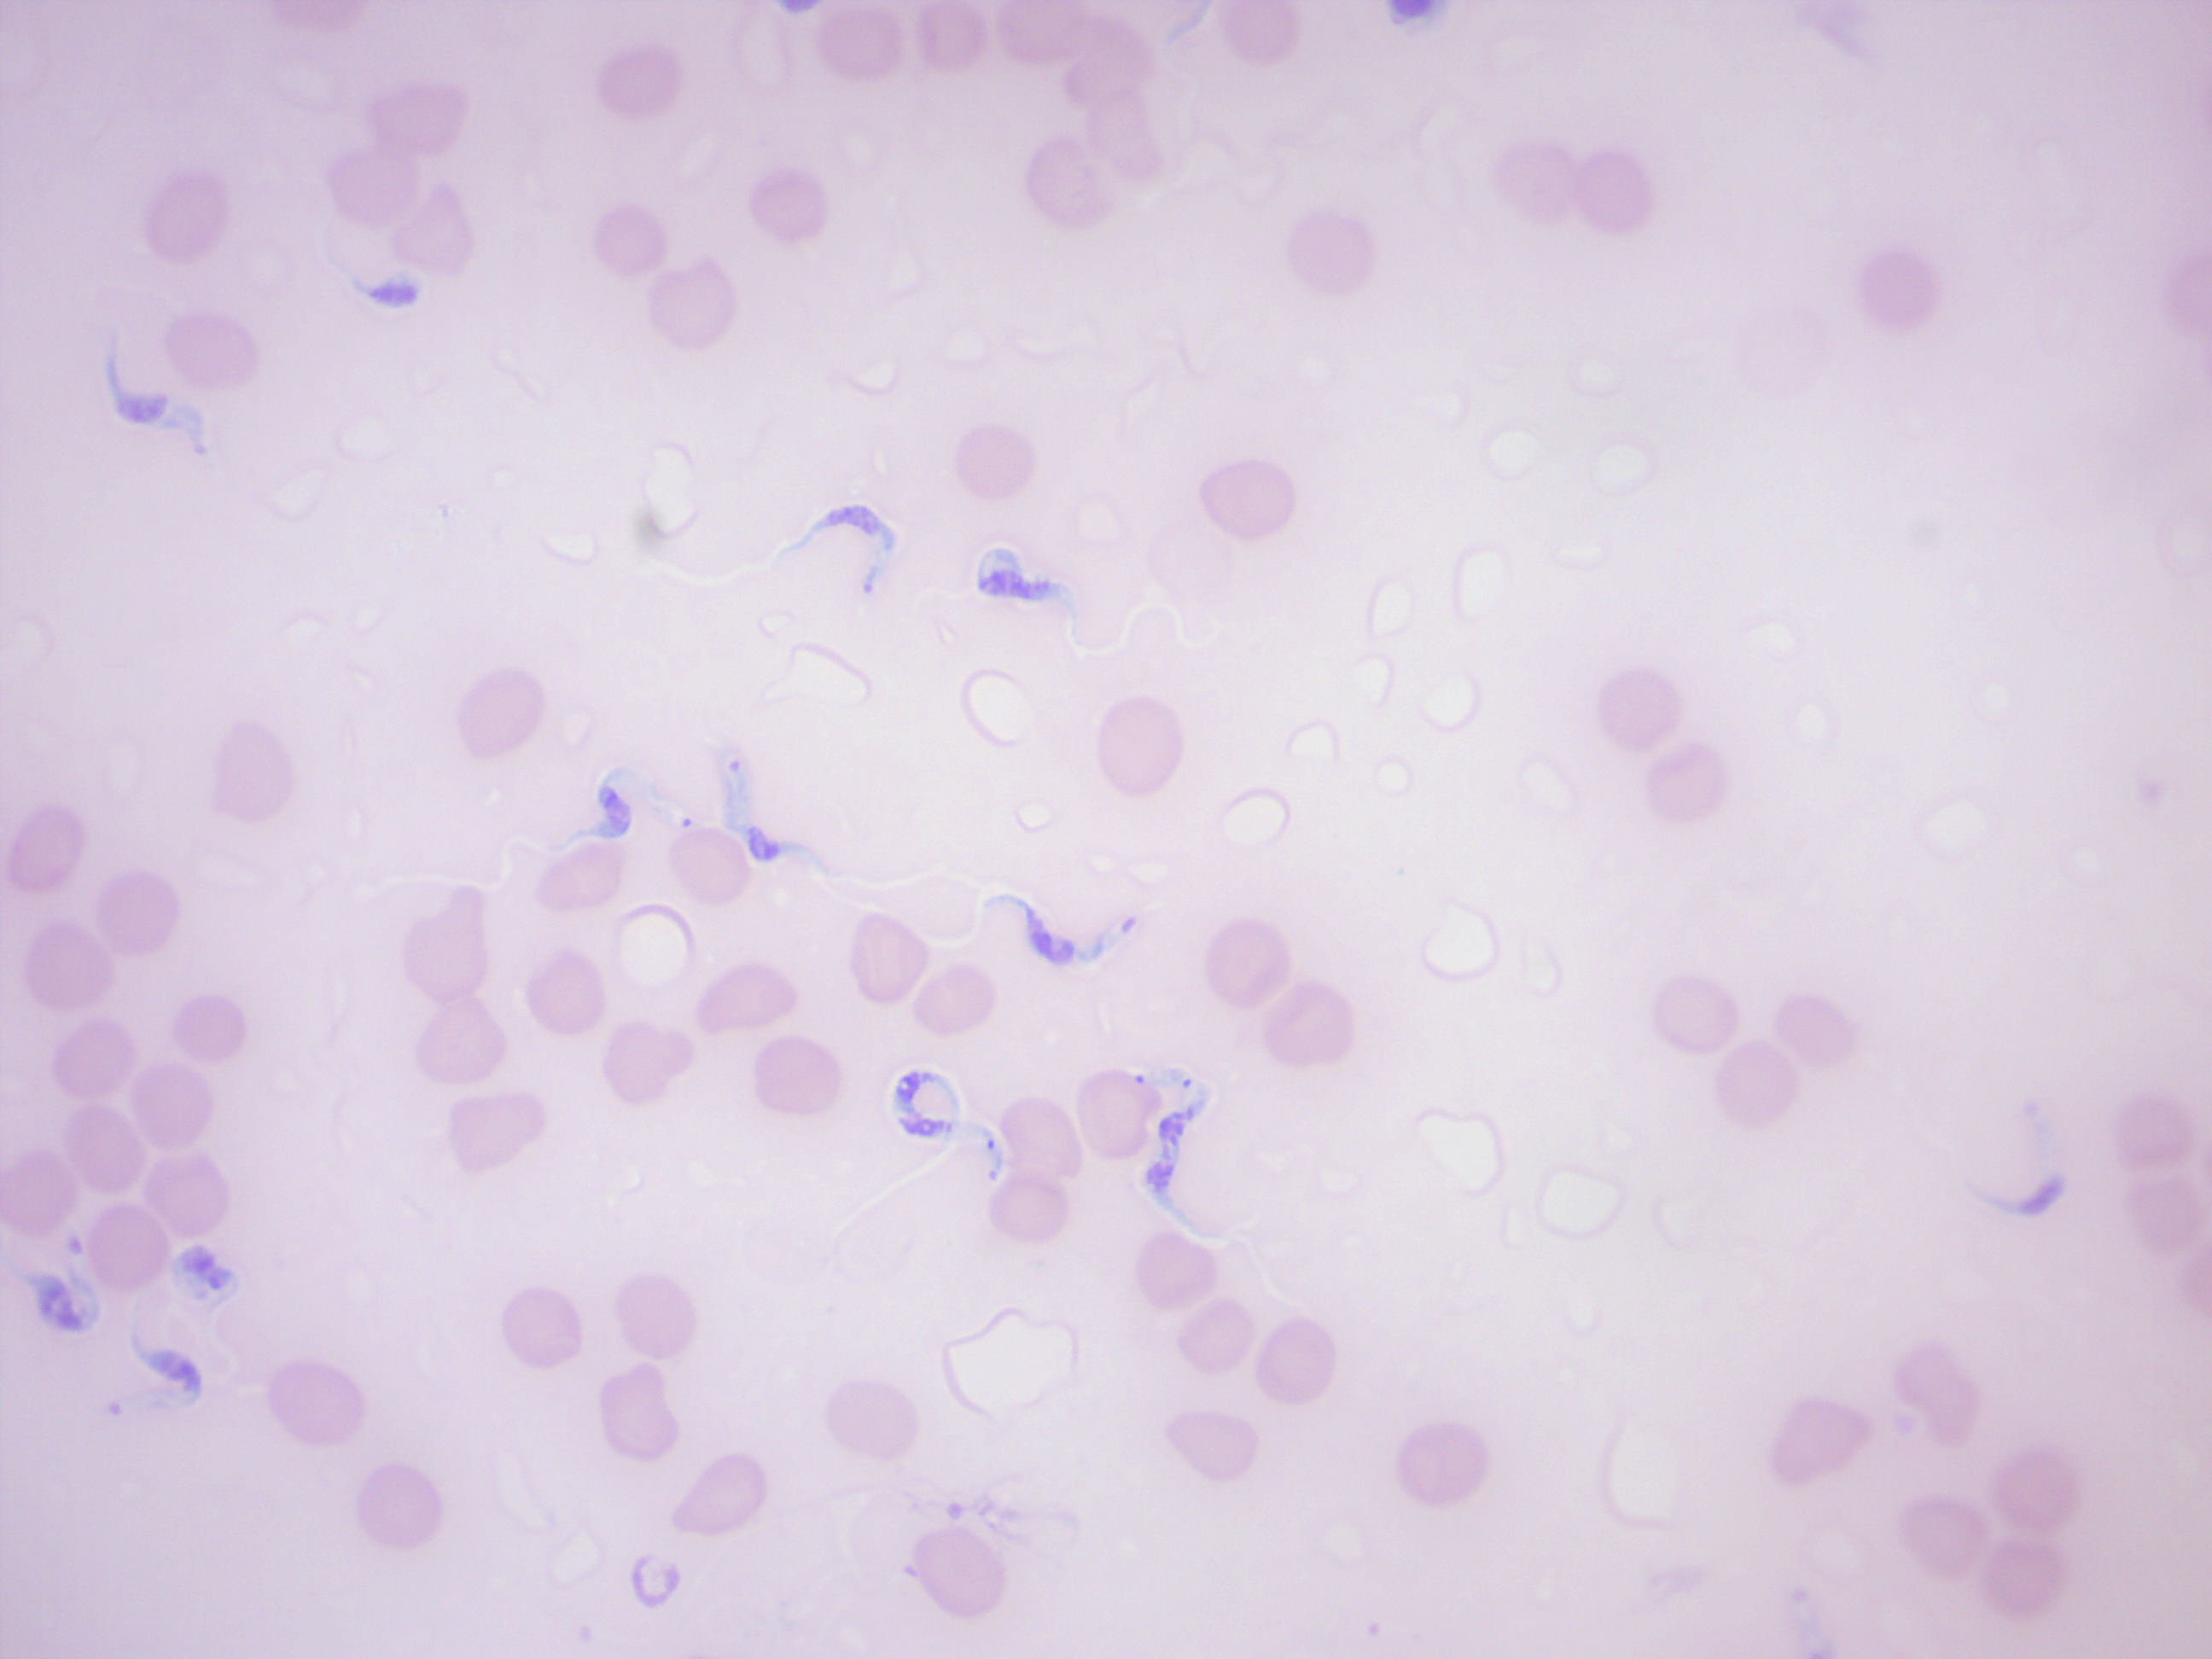 Trypanosoma brucei gambiense among red blood cells.